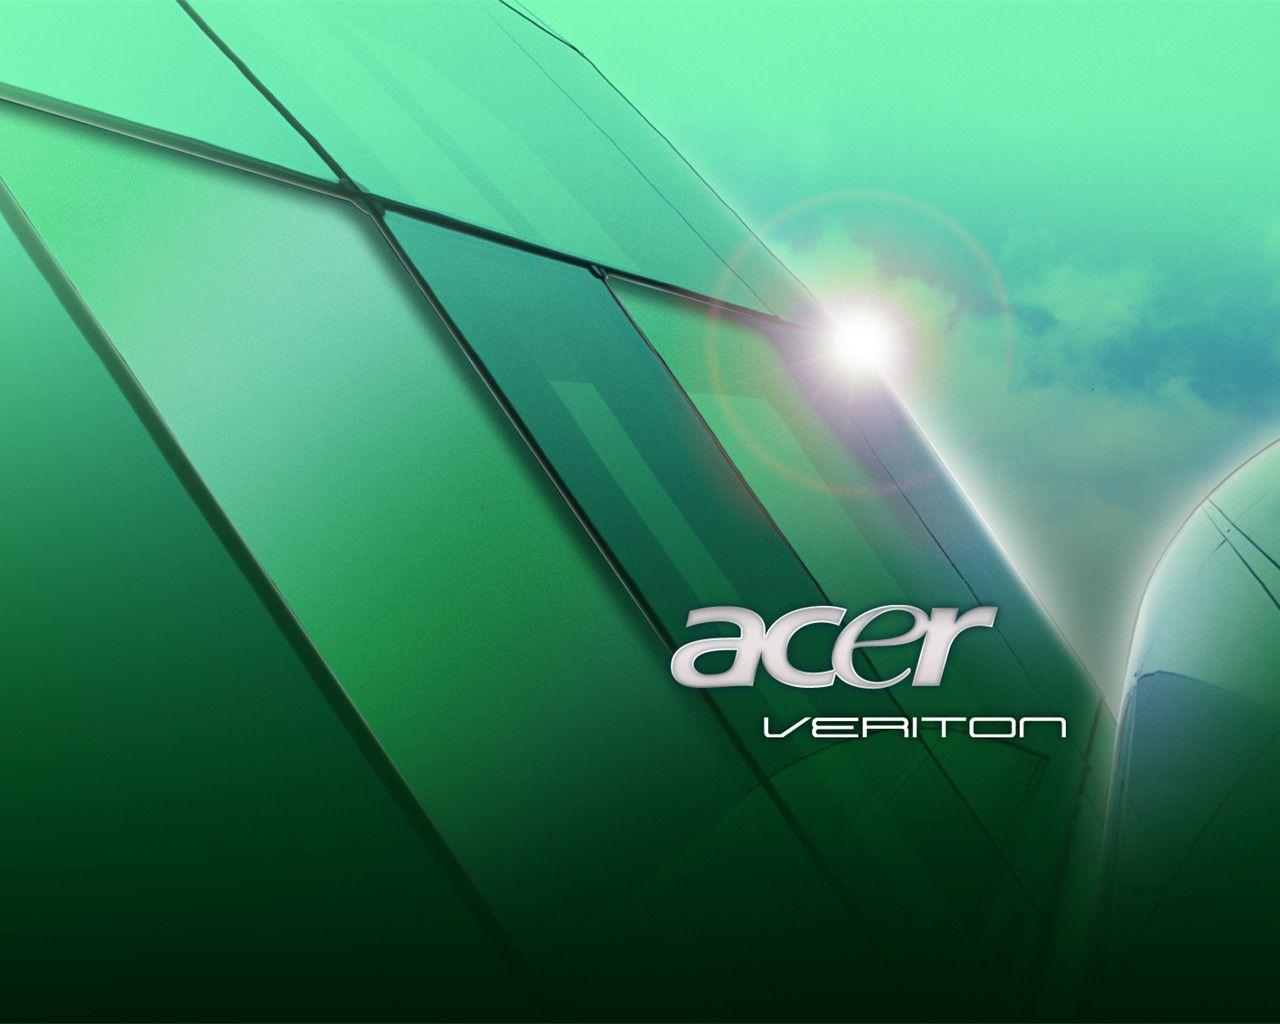 Acer Veriton Wallpapers - Wallpaper Cave